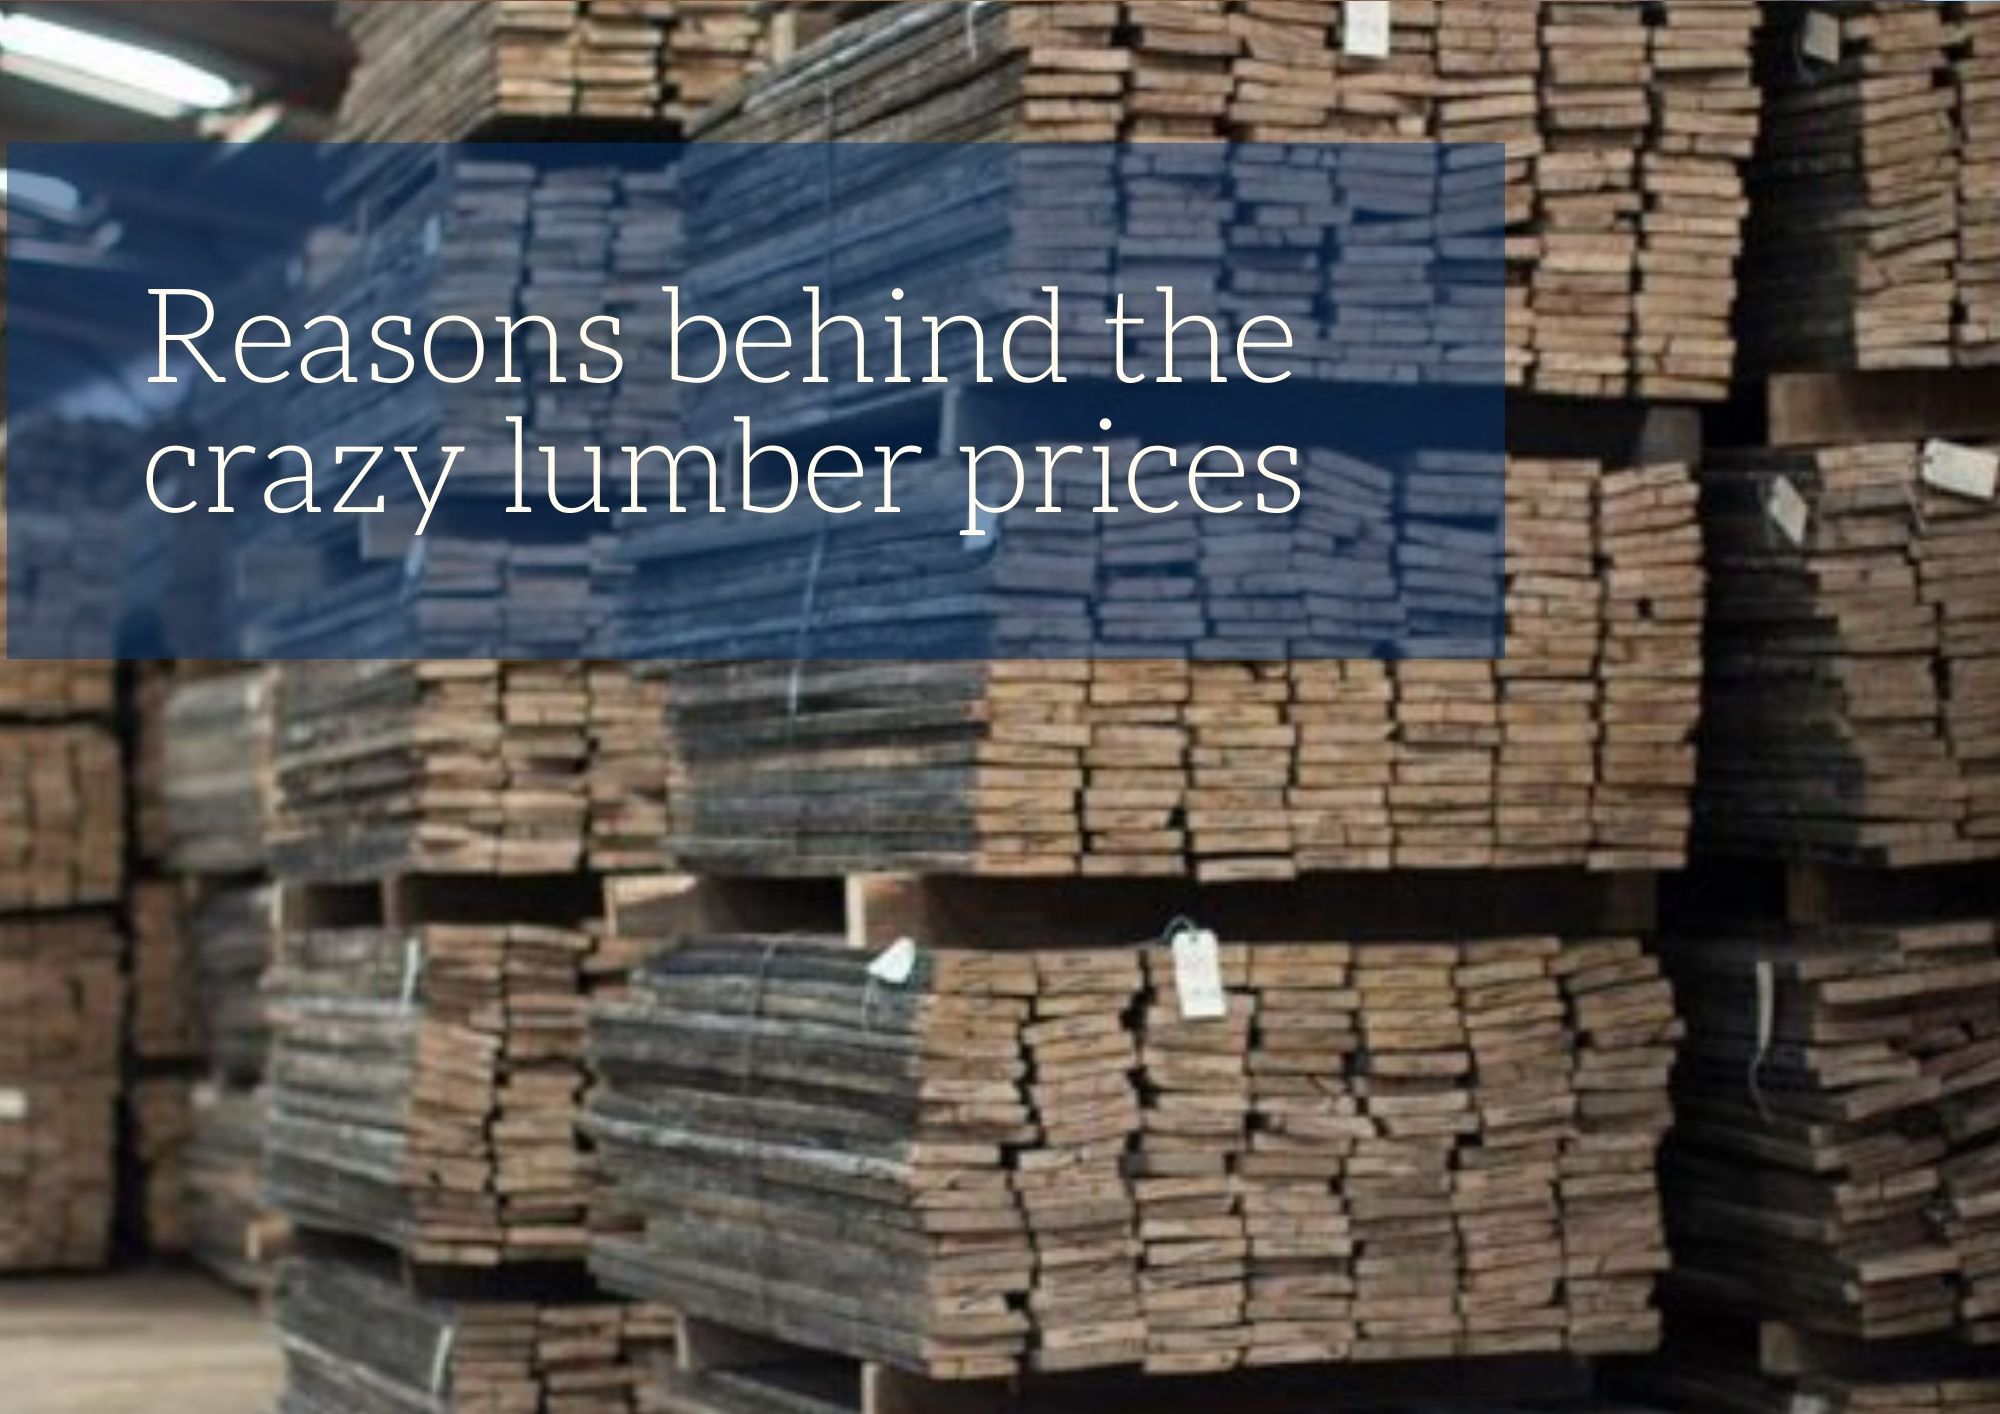 Reasons behind the crazy lumber prices